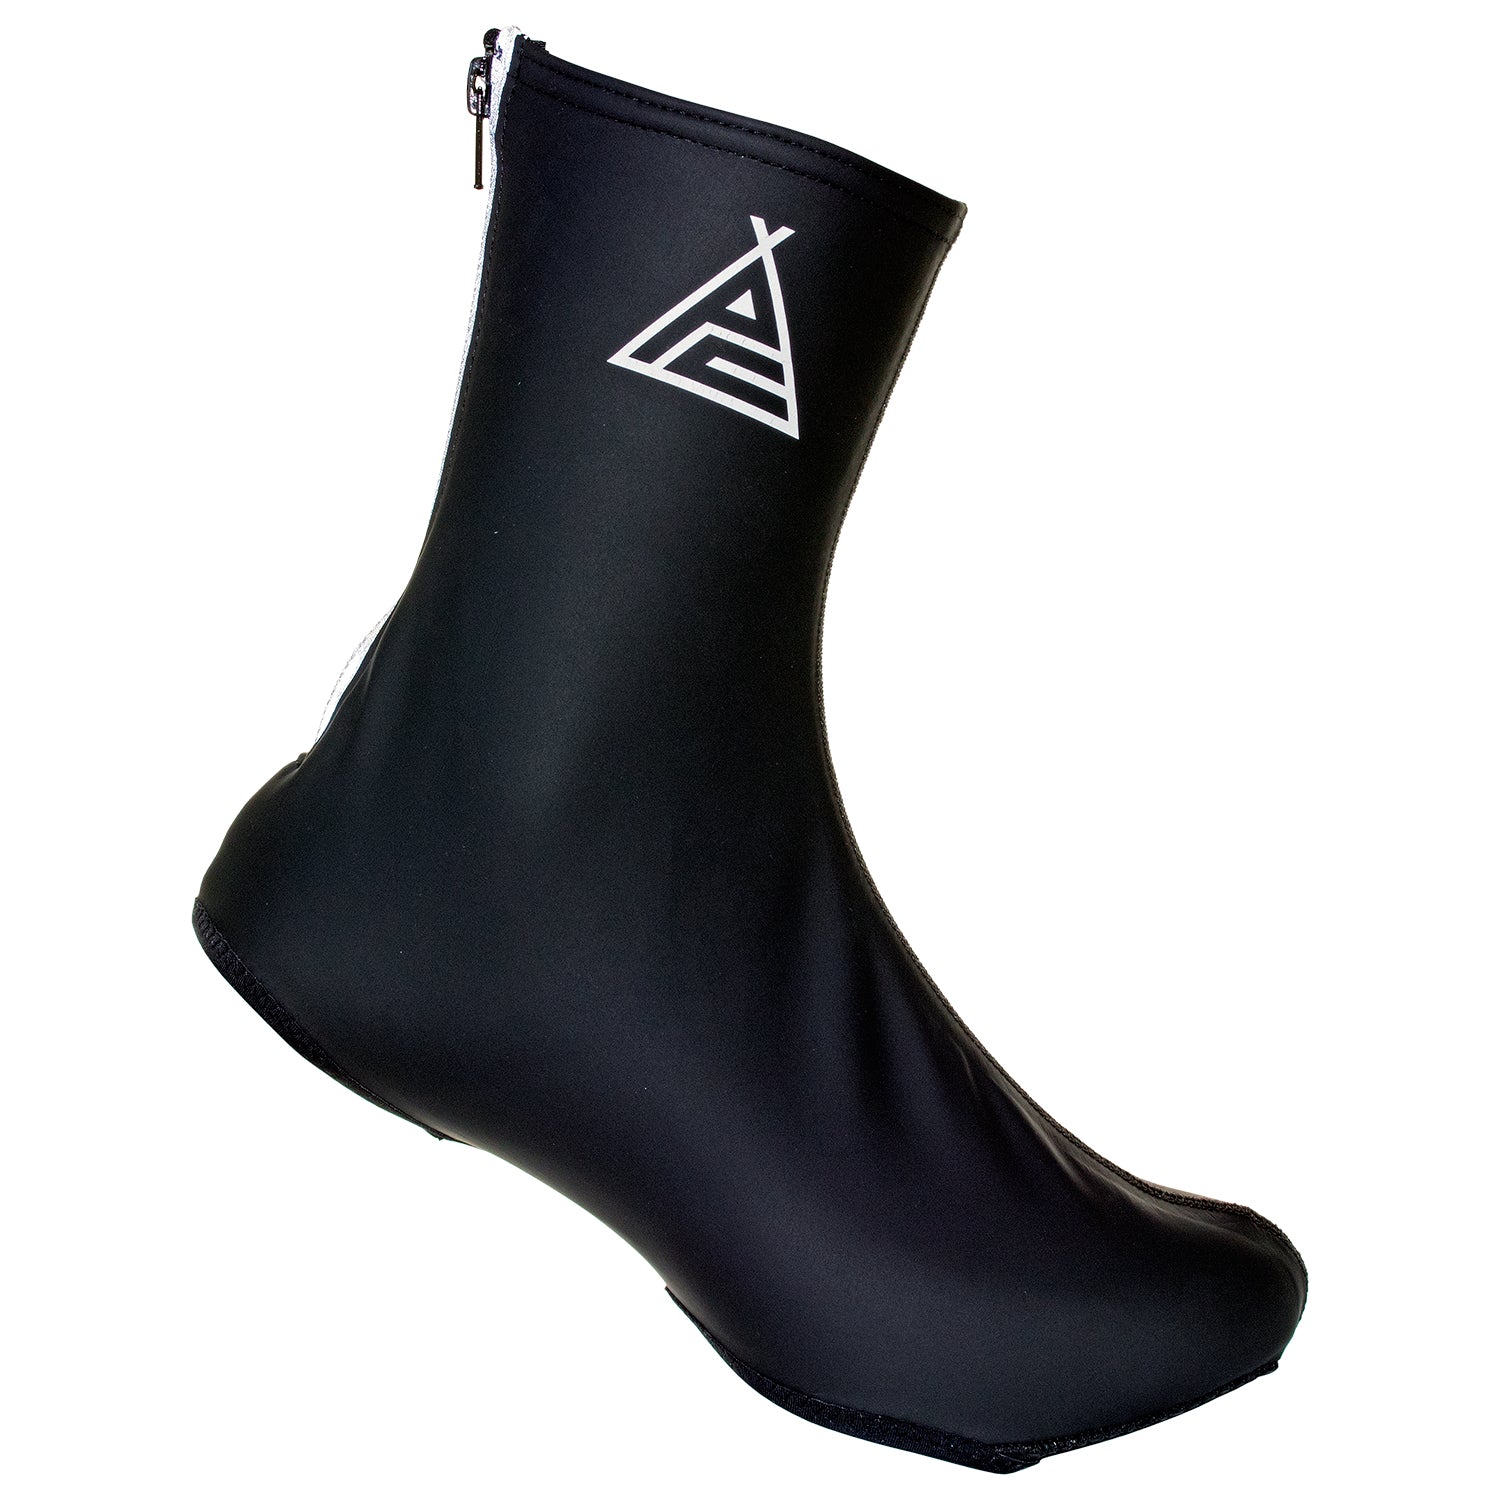 Cycling Overshoes | Overshoes For 